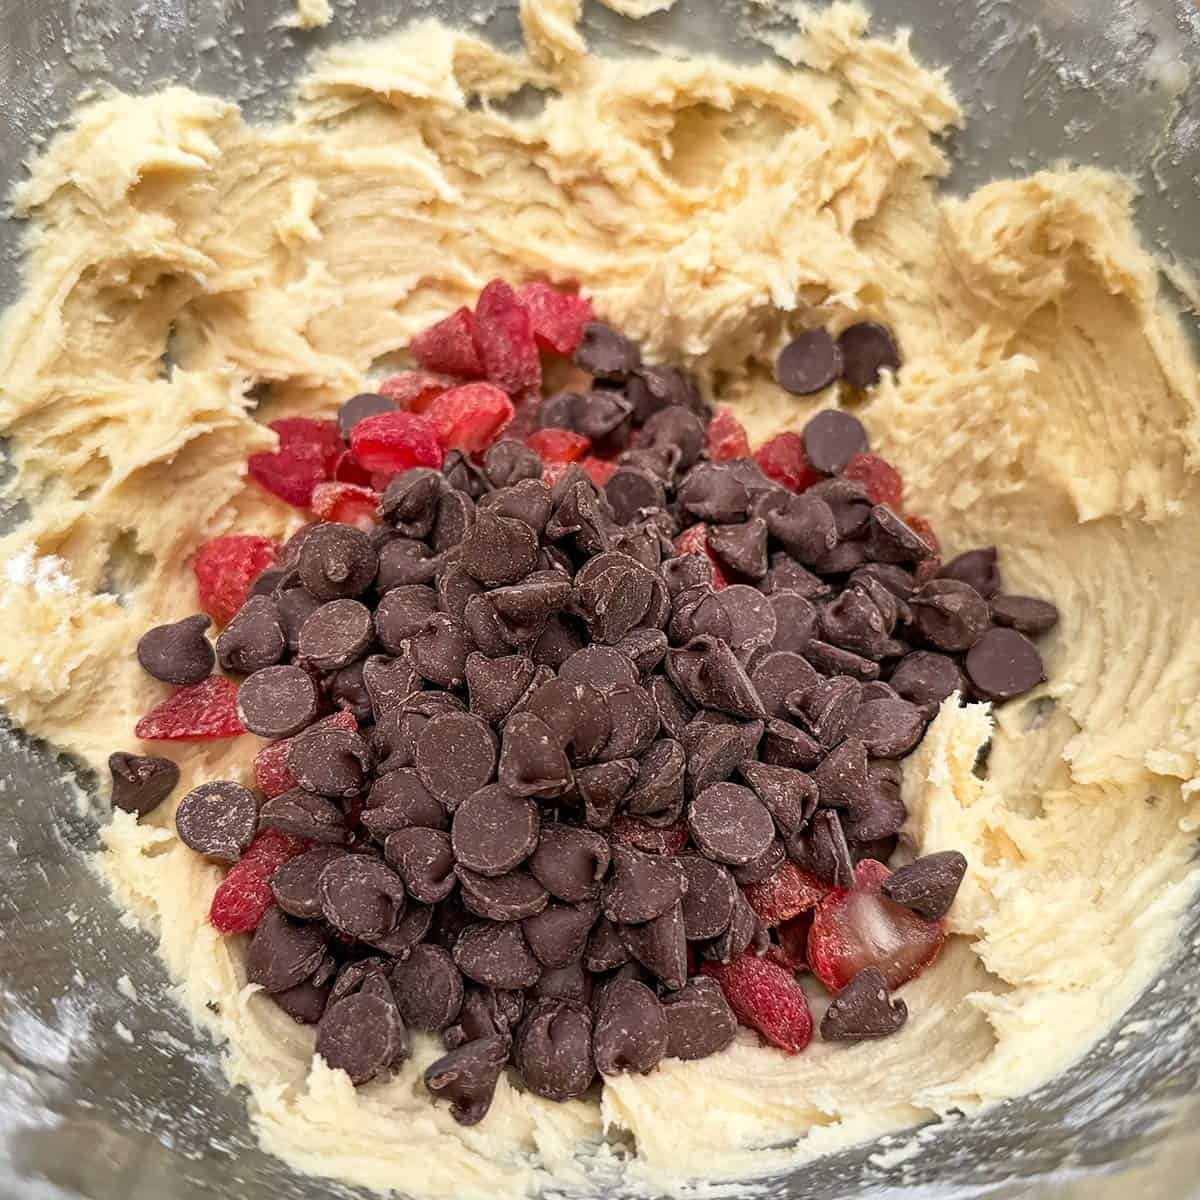 Adding chocolate chips and strawberries to the cookie dough.